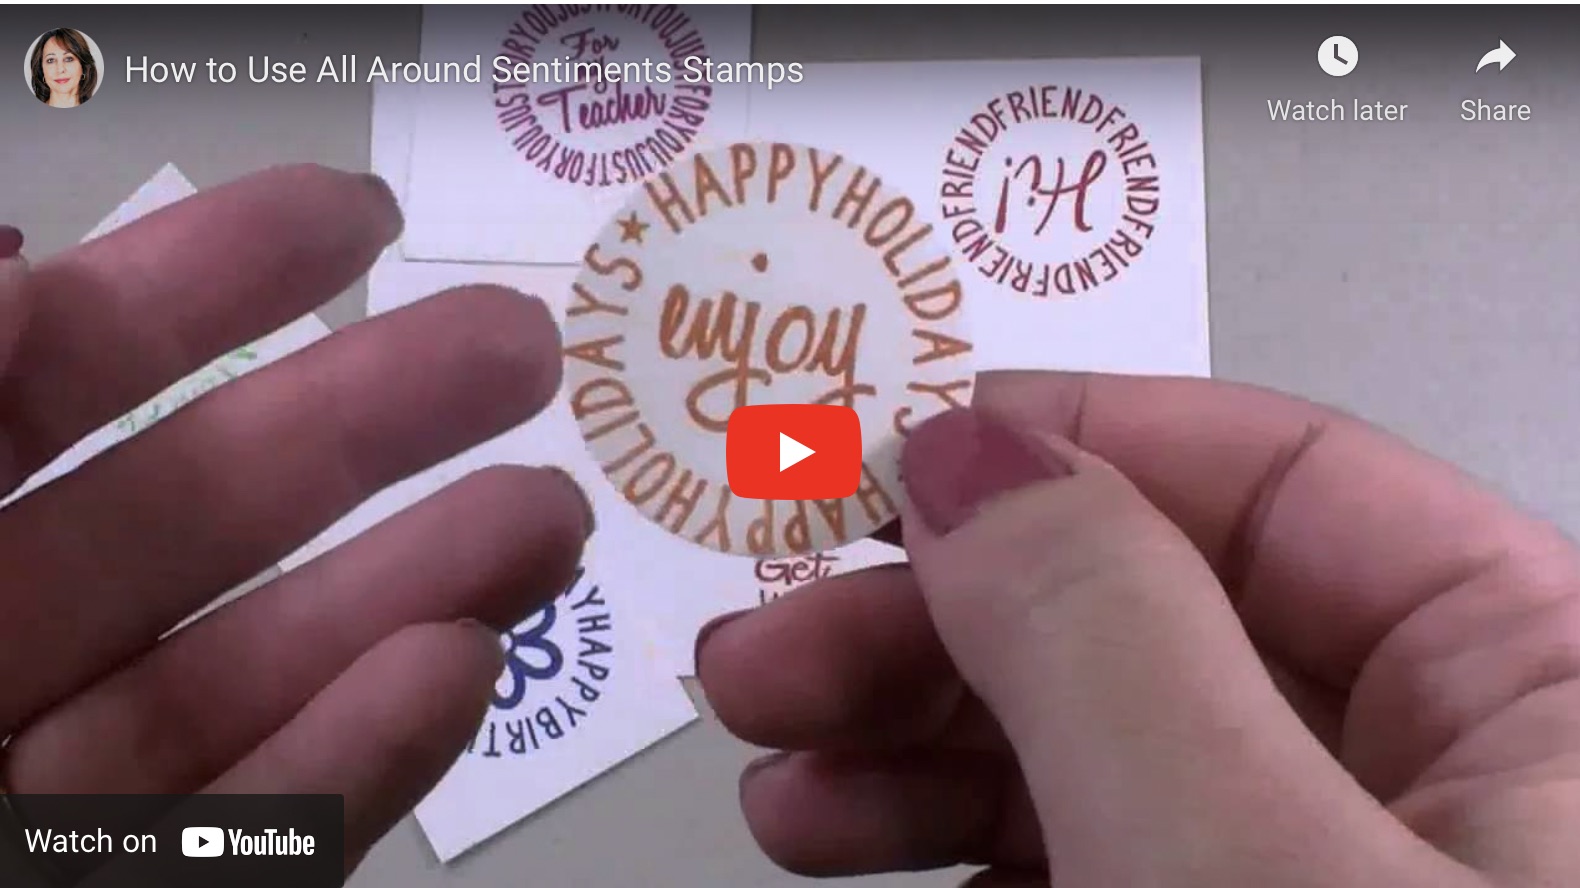 How to Use All Around Sentiments Stamps